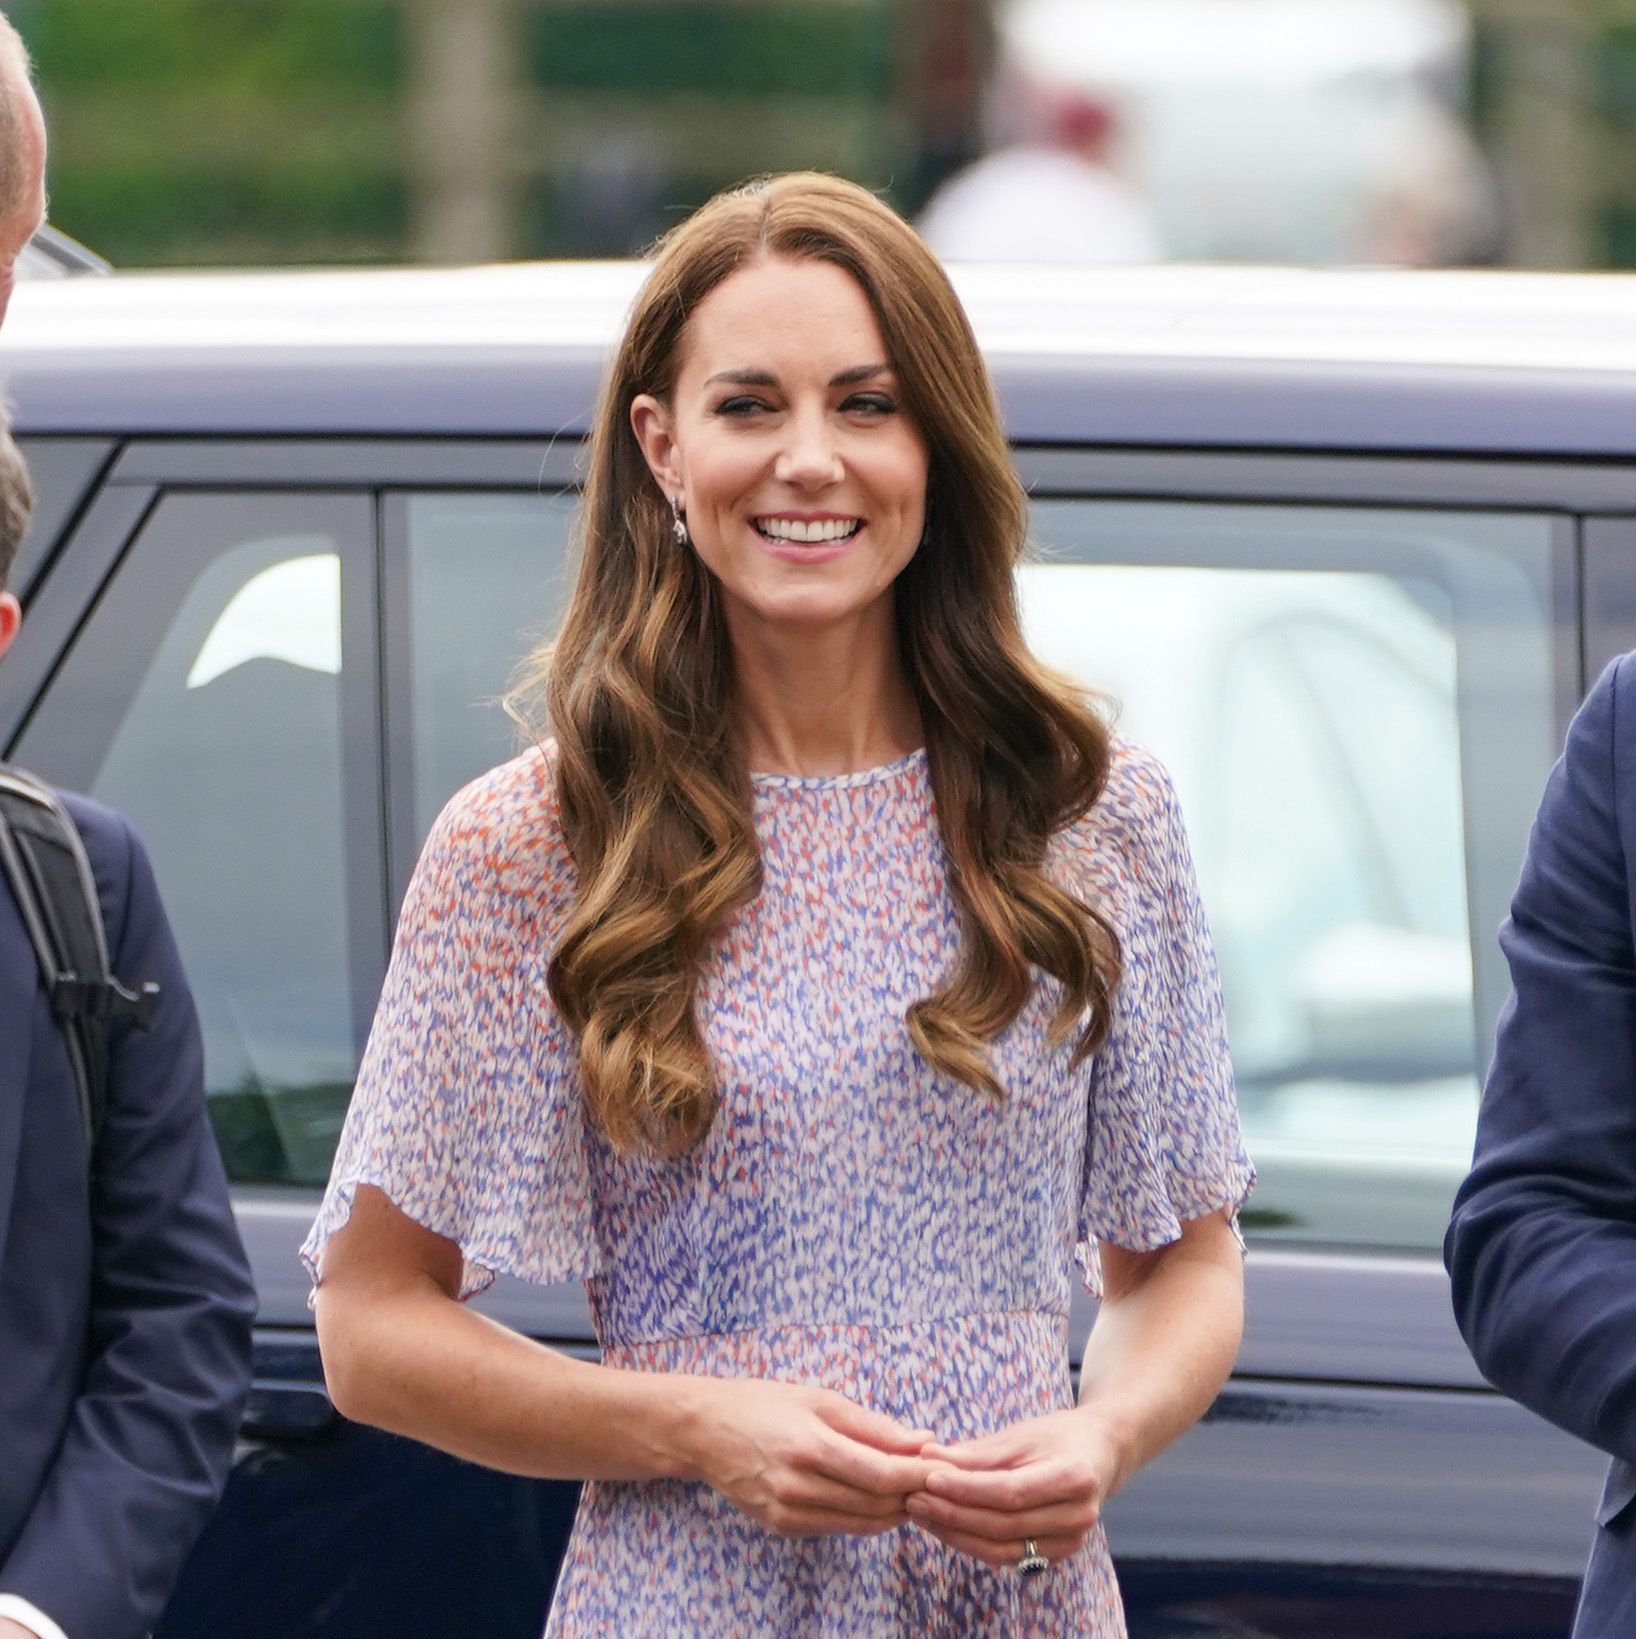 A Body Language Expert Says Kate Middleton Uses the 